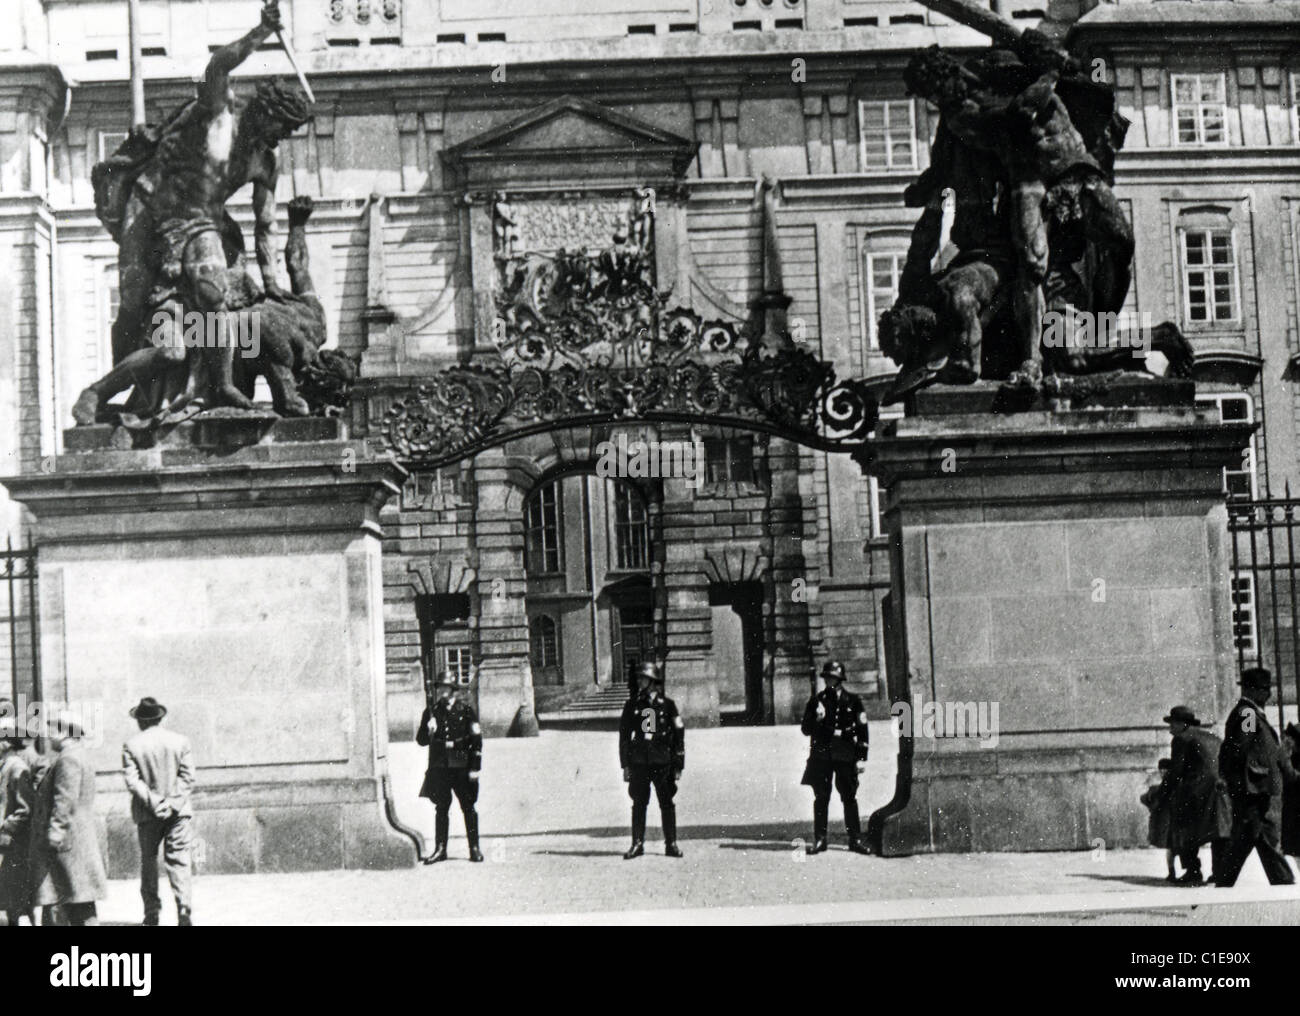 GERMAN SOLDIERS GUARDING Prague Castle after the Nazi occupation of Czechoslovakia in March 1939 Stock Photo